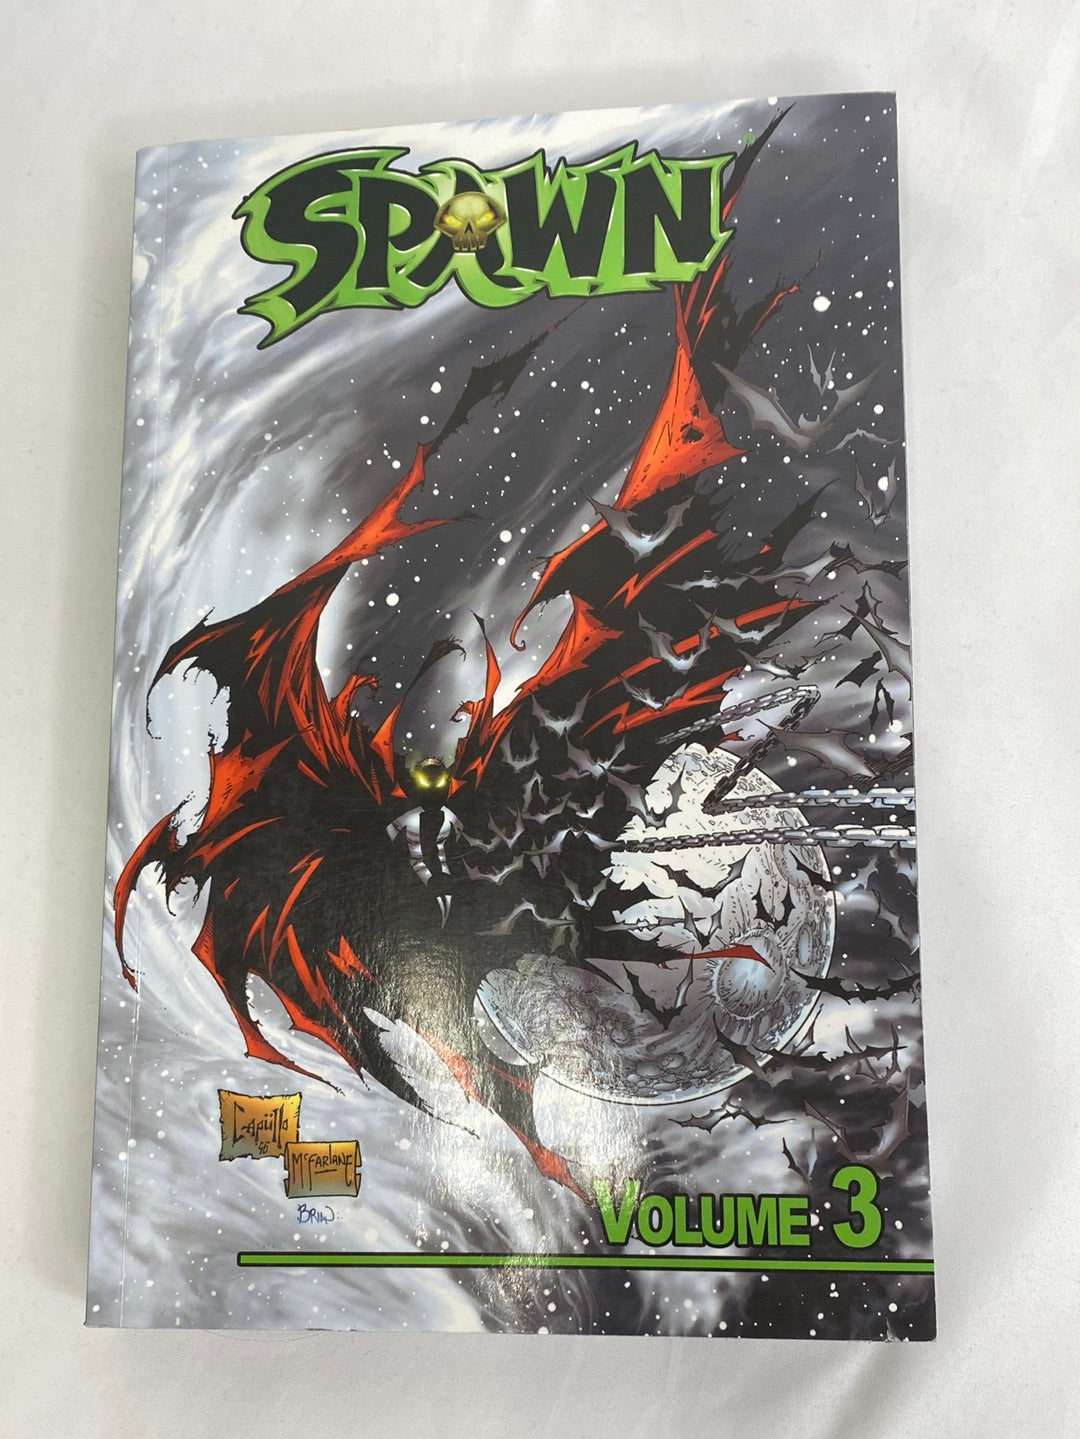 Spawn Collection Vol.3 by Todd McFarlane